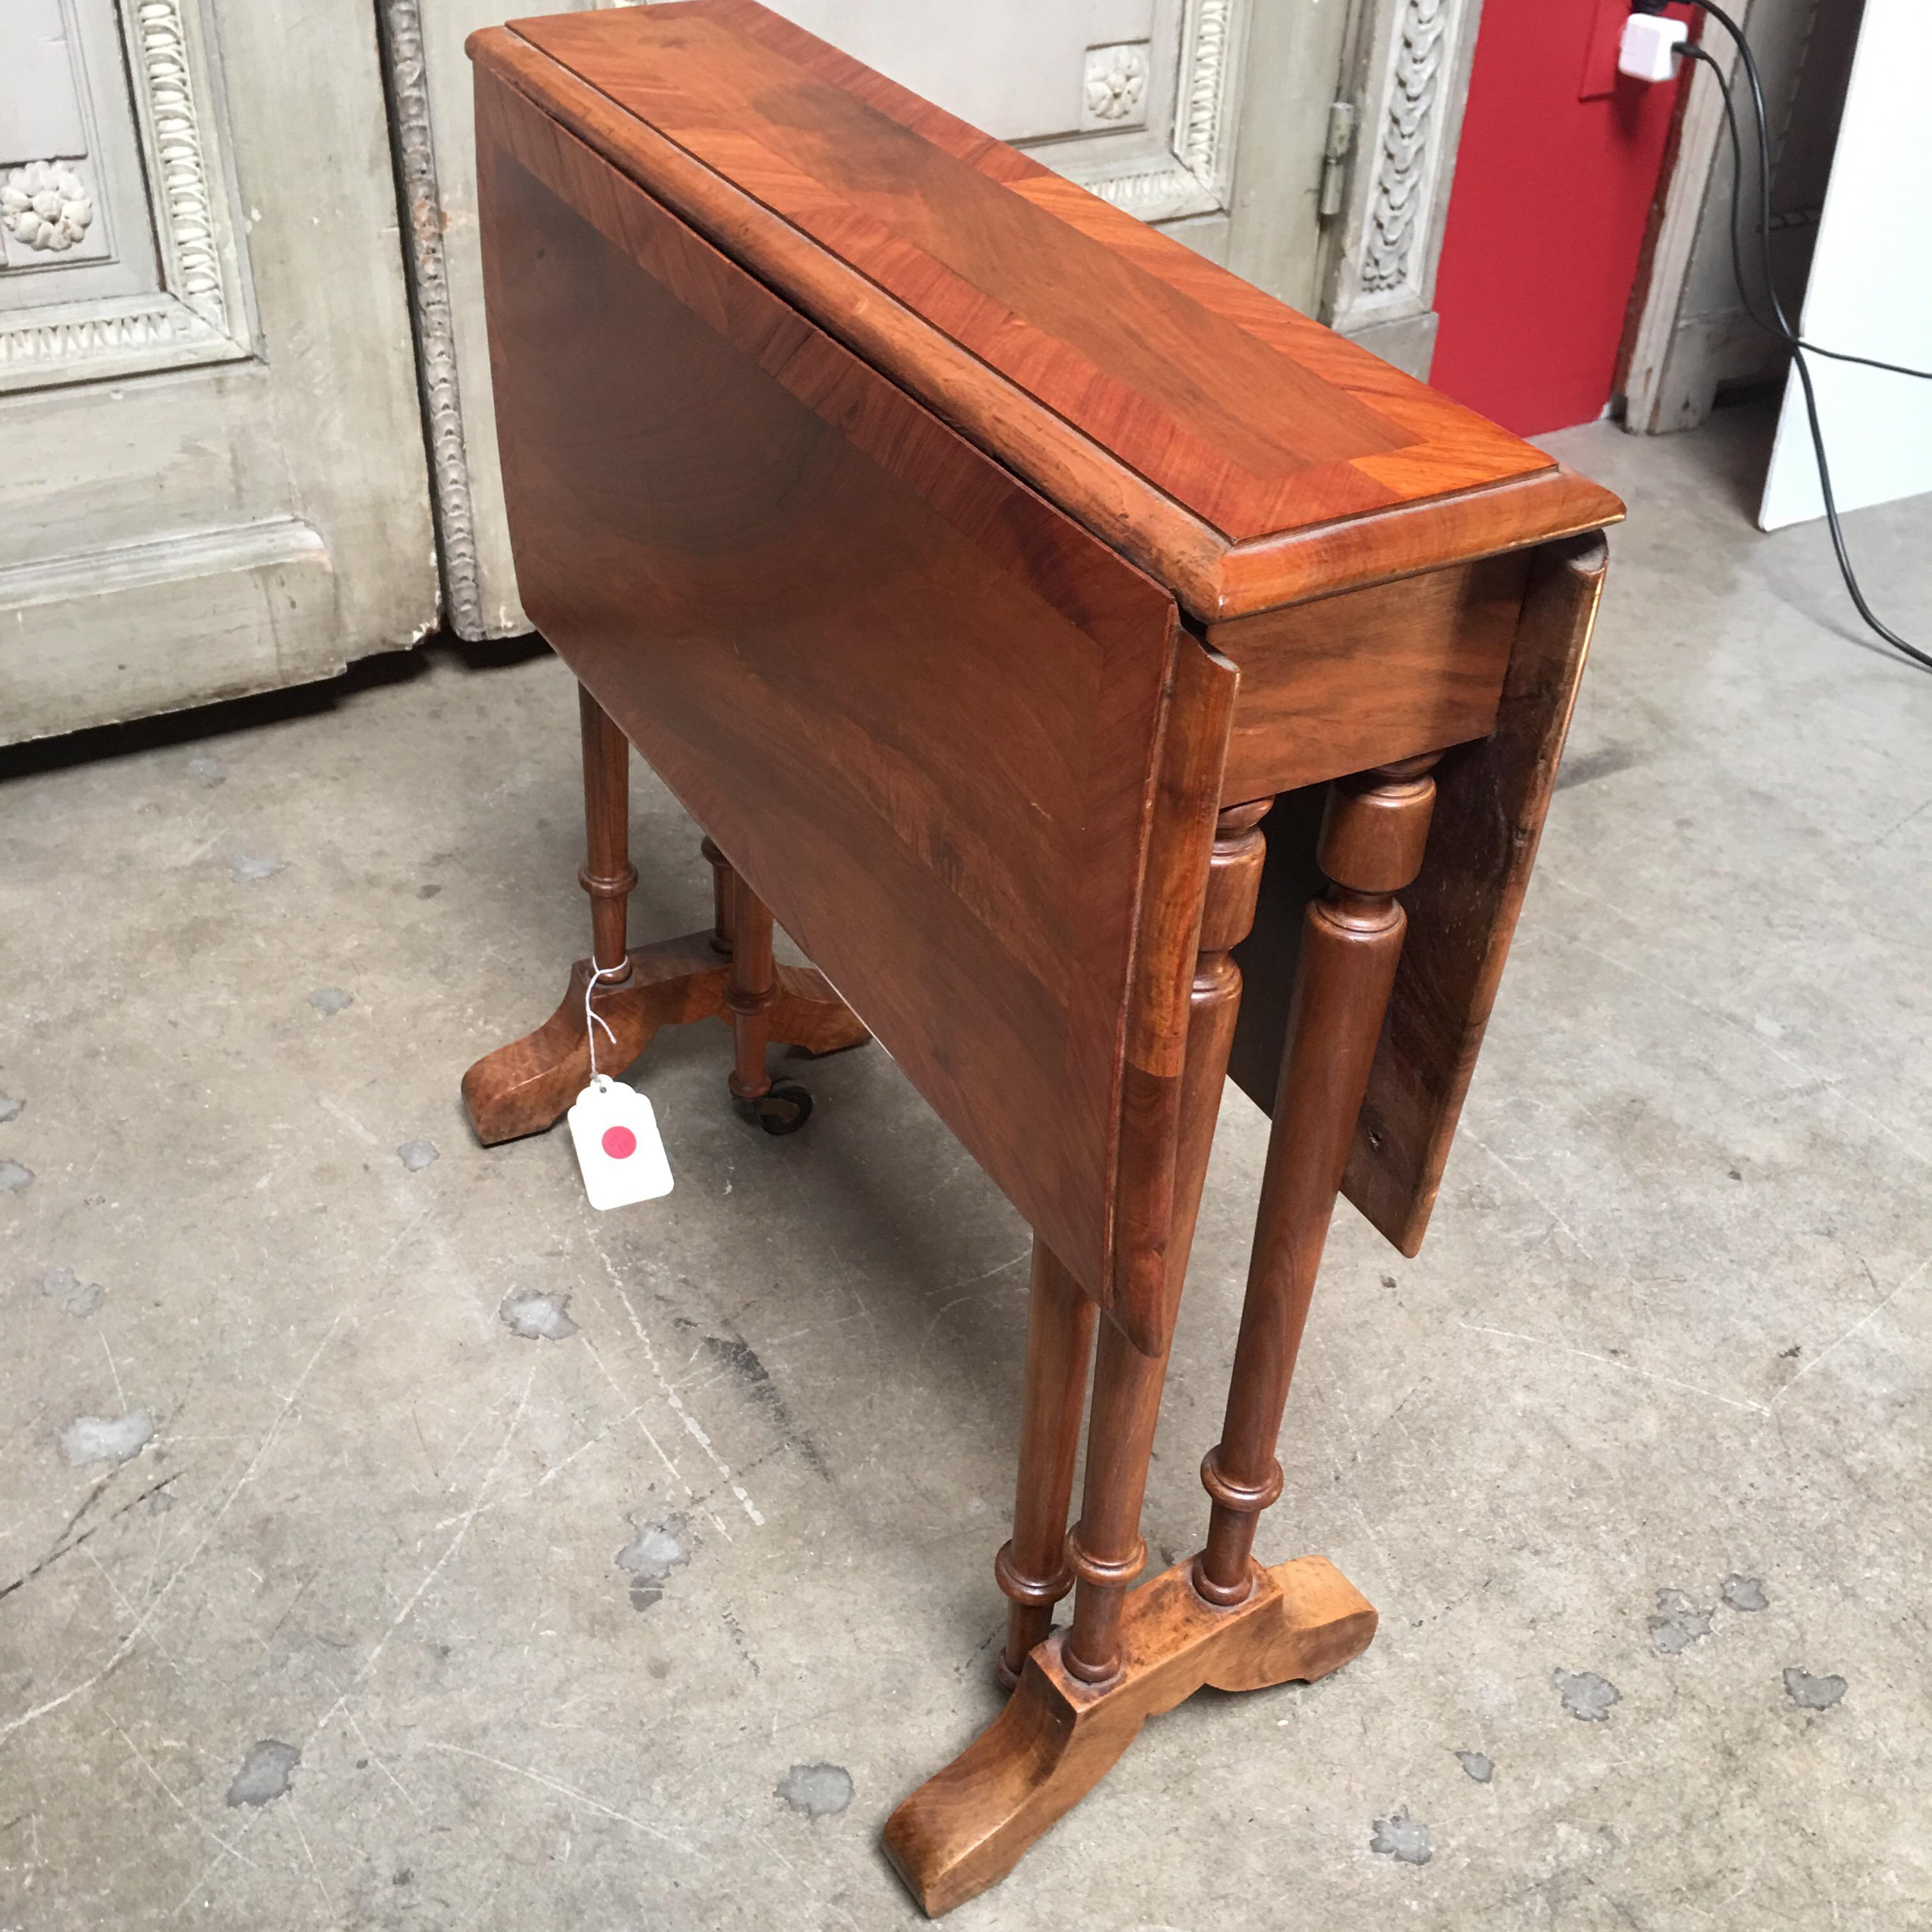 19th Century English Sutherland Drop-Leaf Table in Walnut and Kingwood Veneer For Sale 5